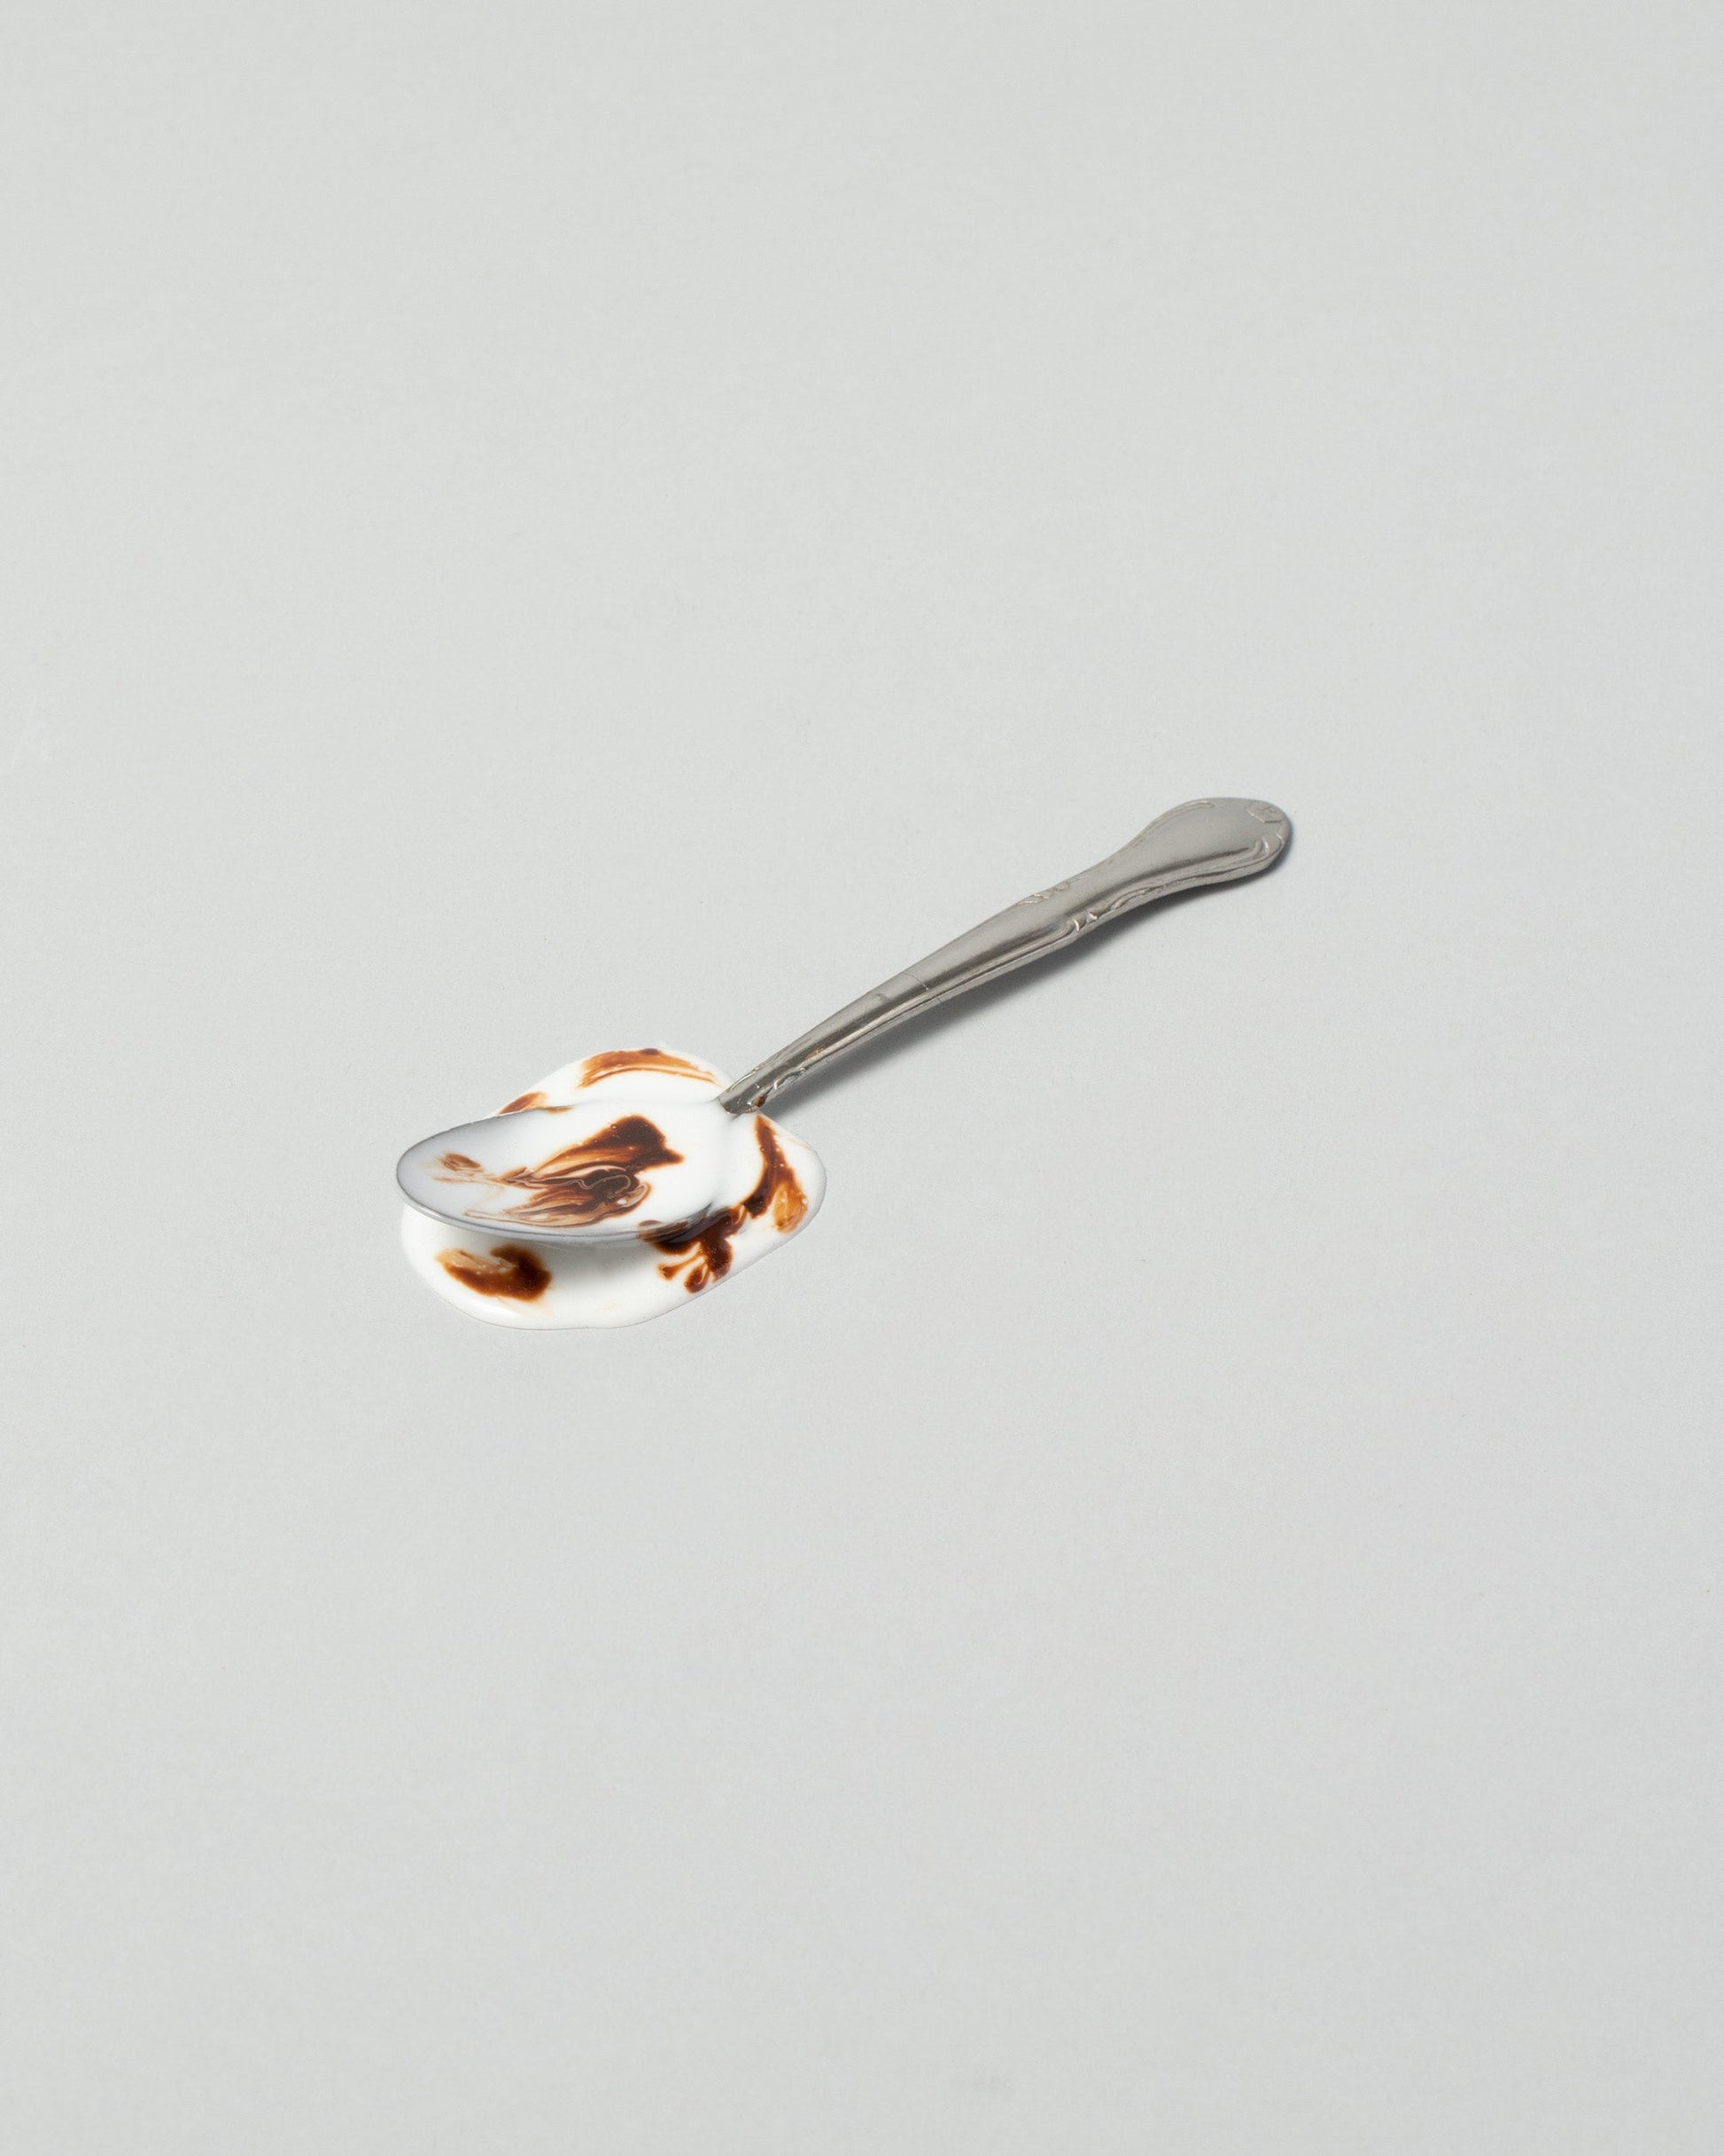 Spills Ice Cream Spoon on light color background.